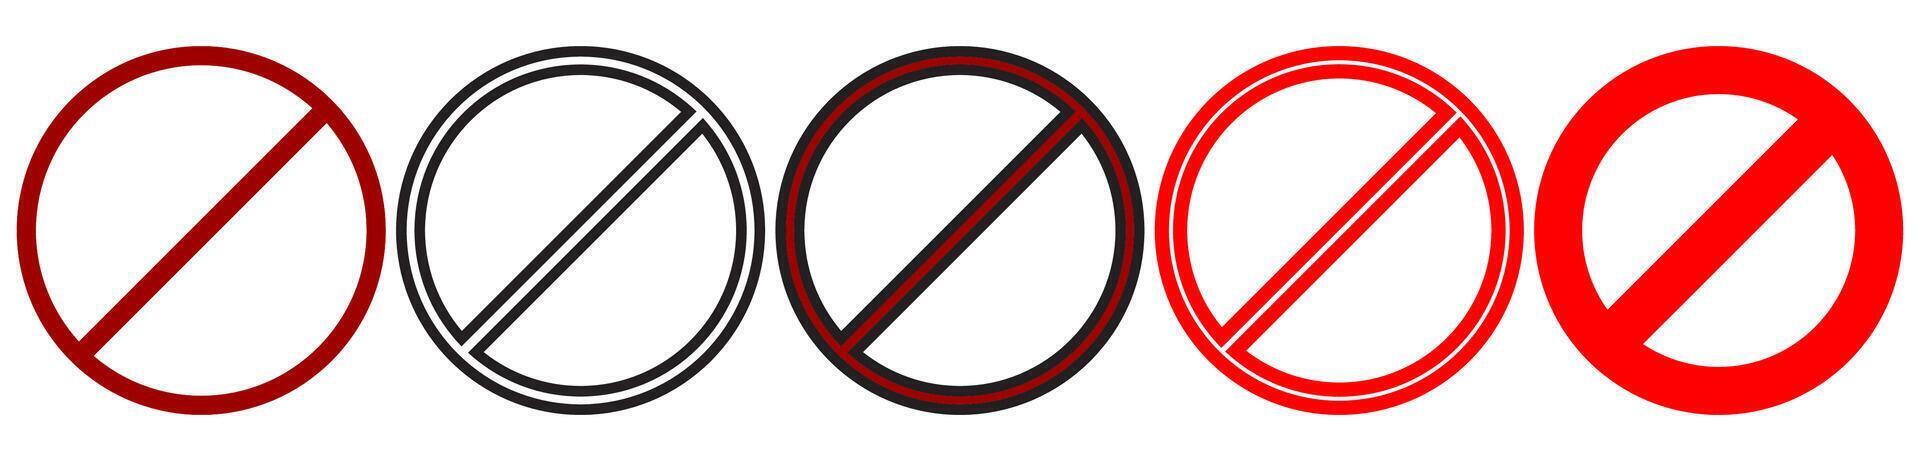 stop prohibition sign red circle no doing stop sign vector